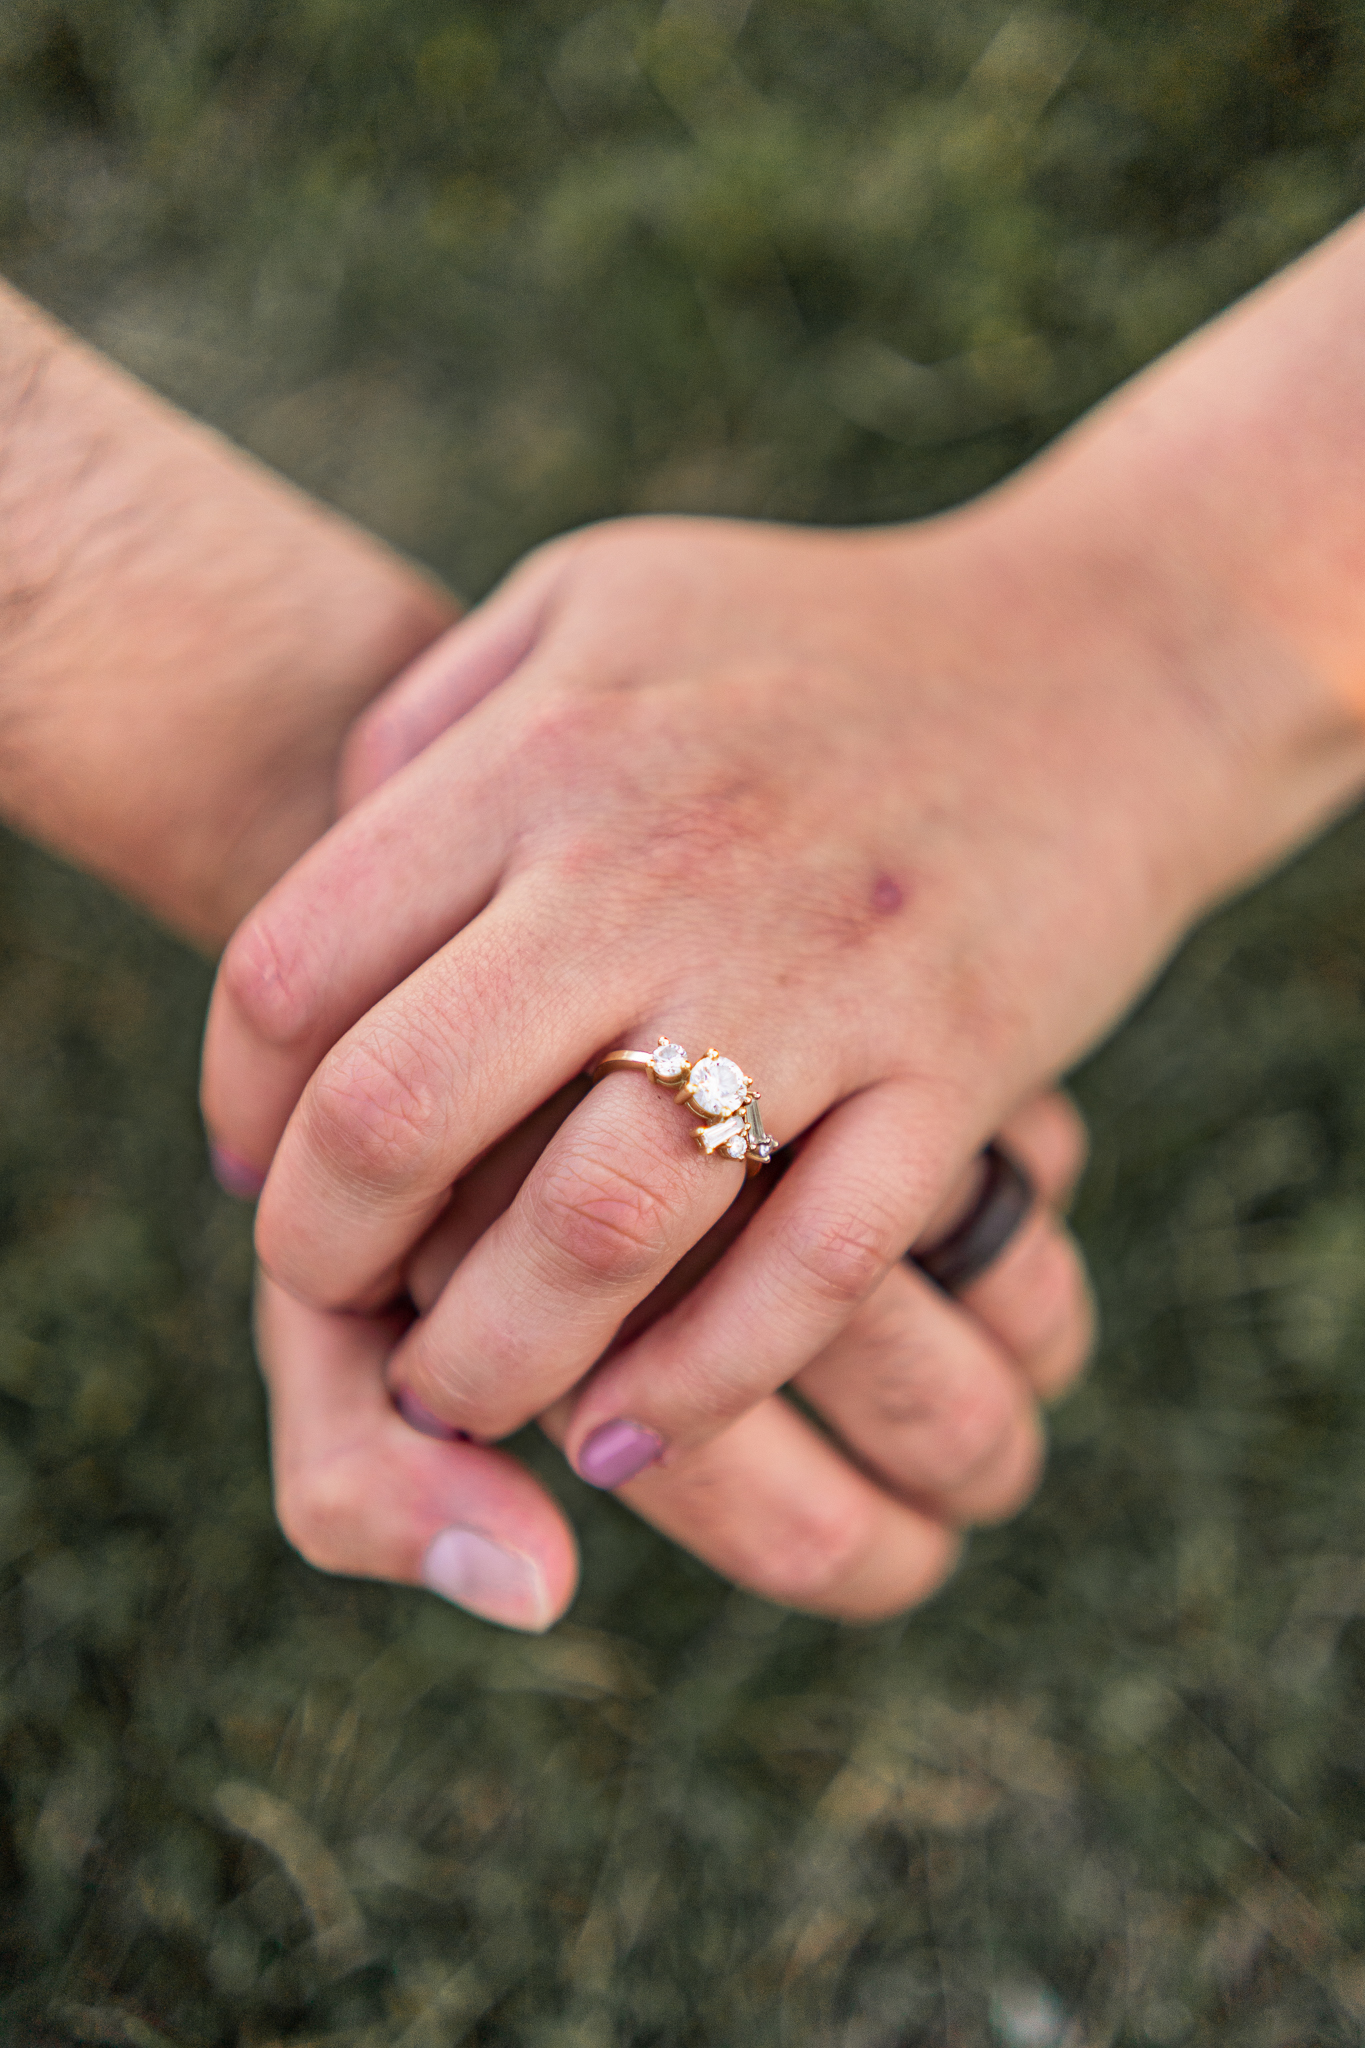 details of an engagement ring while holding hands